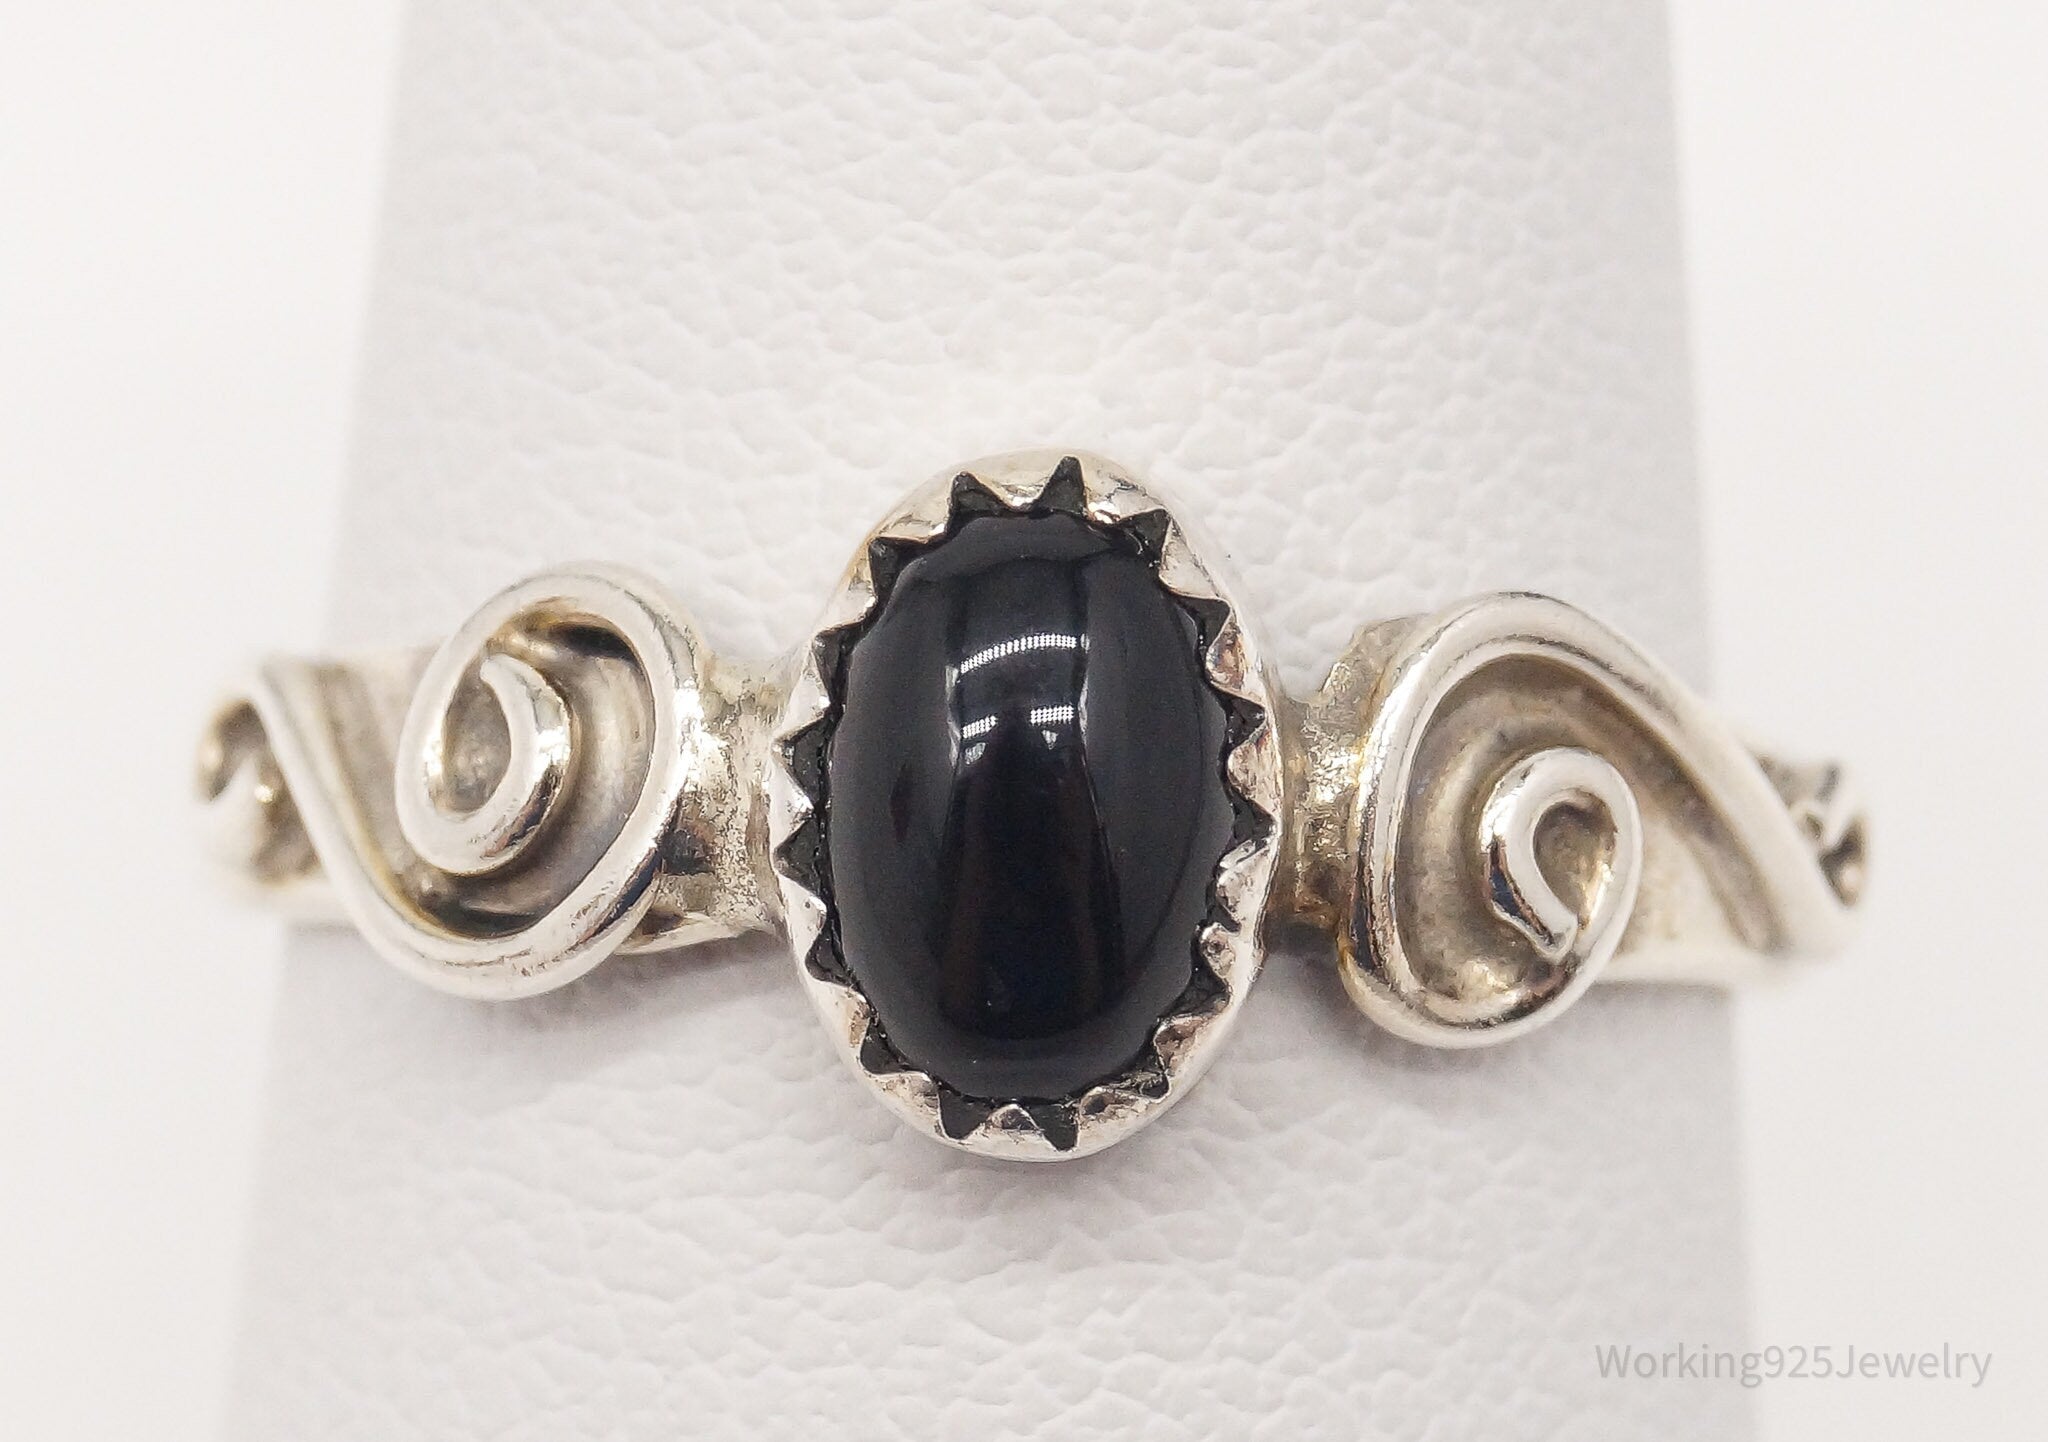 Vintage Native American Black Onyx Sterling Silver Ring Size 7.25